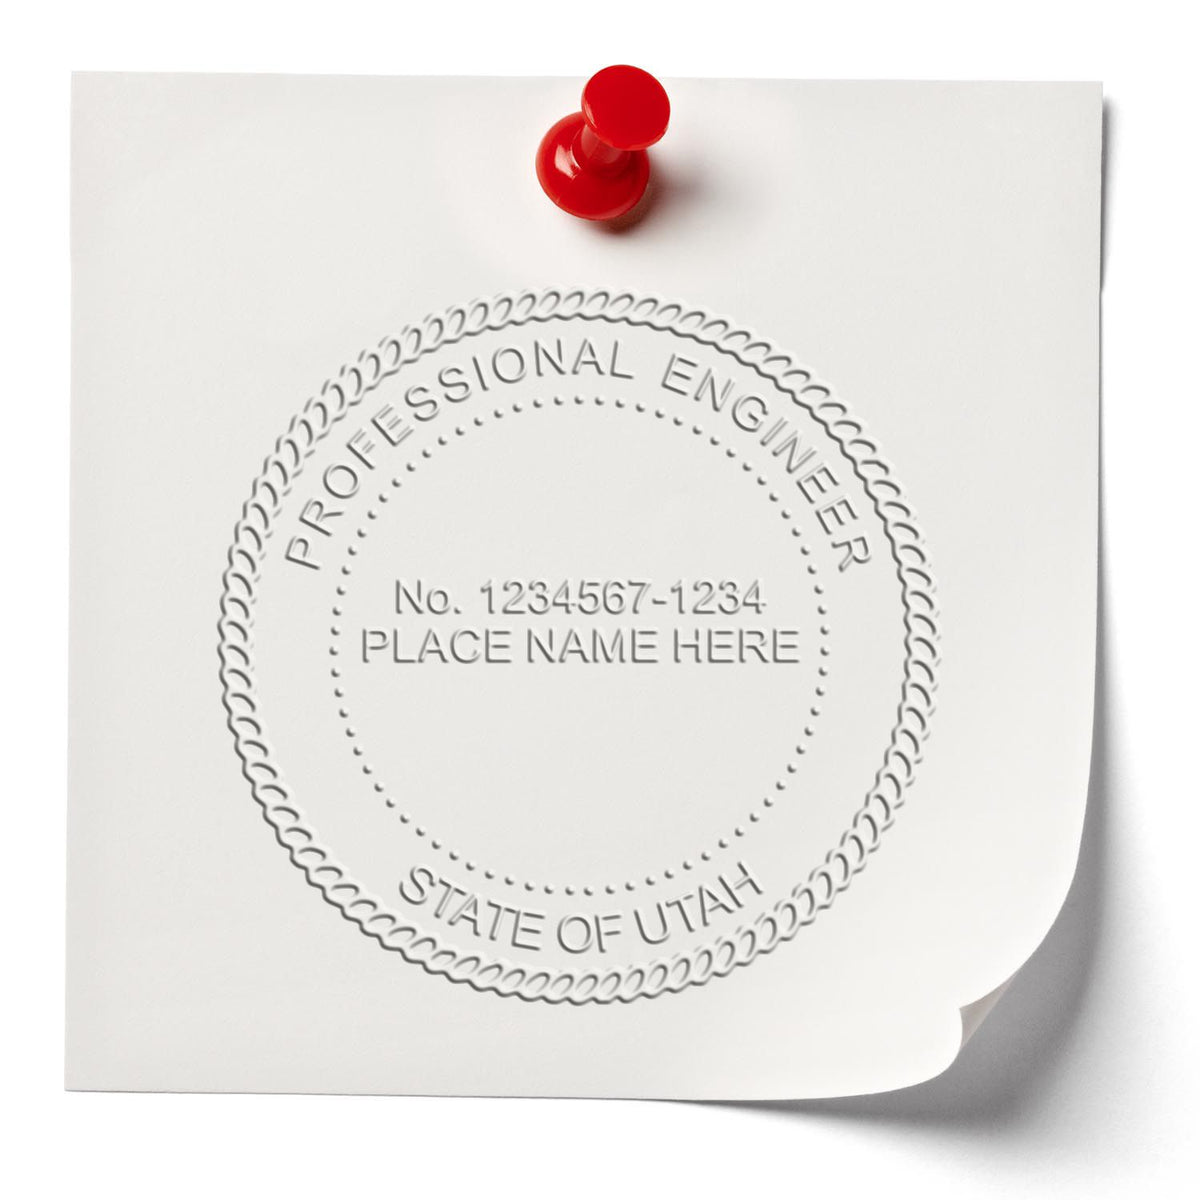 A stamped imprint of the Gift Utah Engineer Seal in this stylish lifestyle photo, setting the tone for a unique and personalized product.